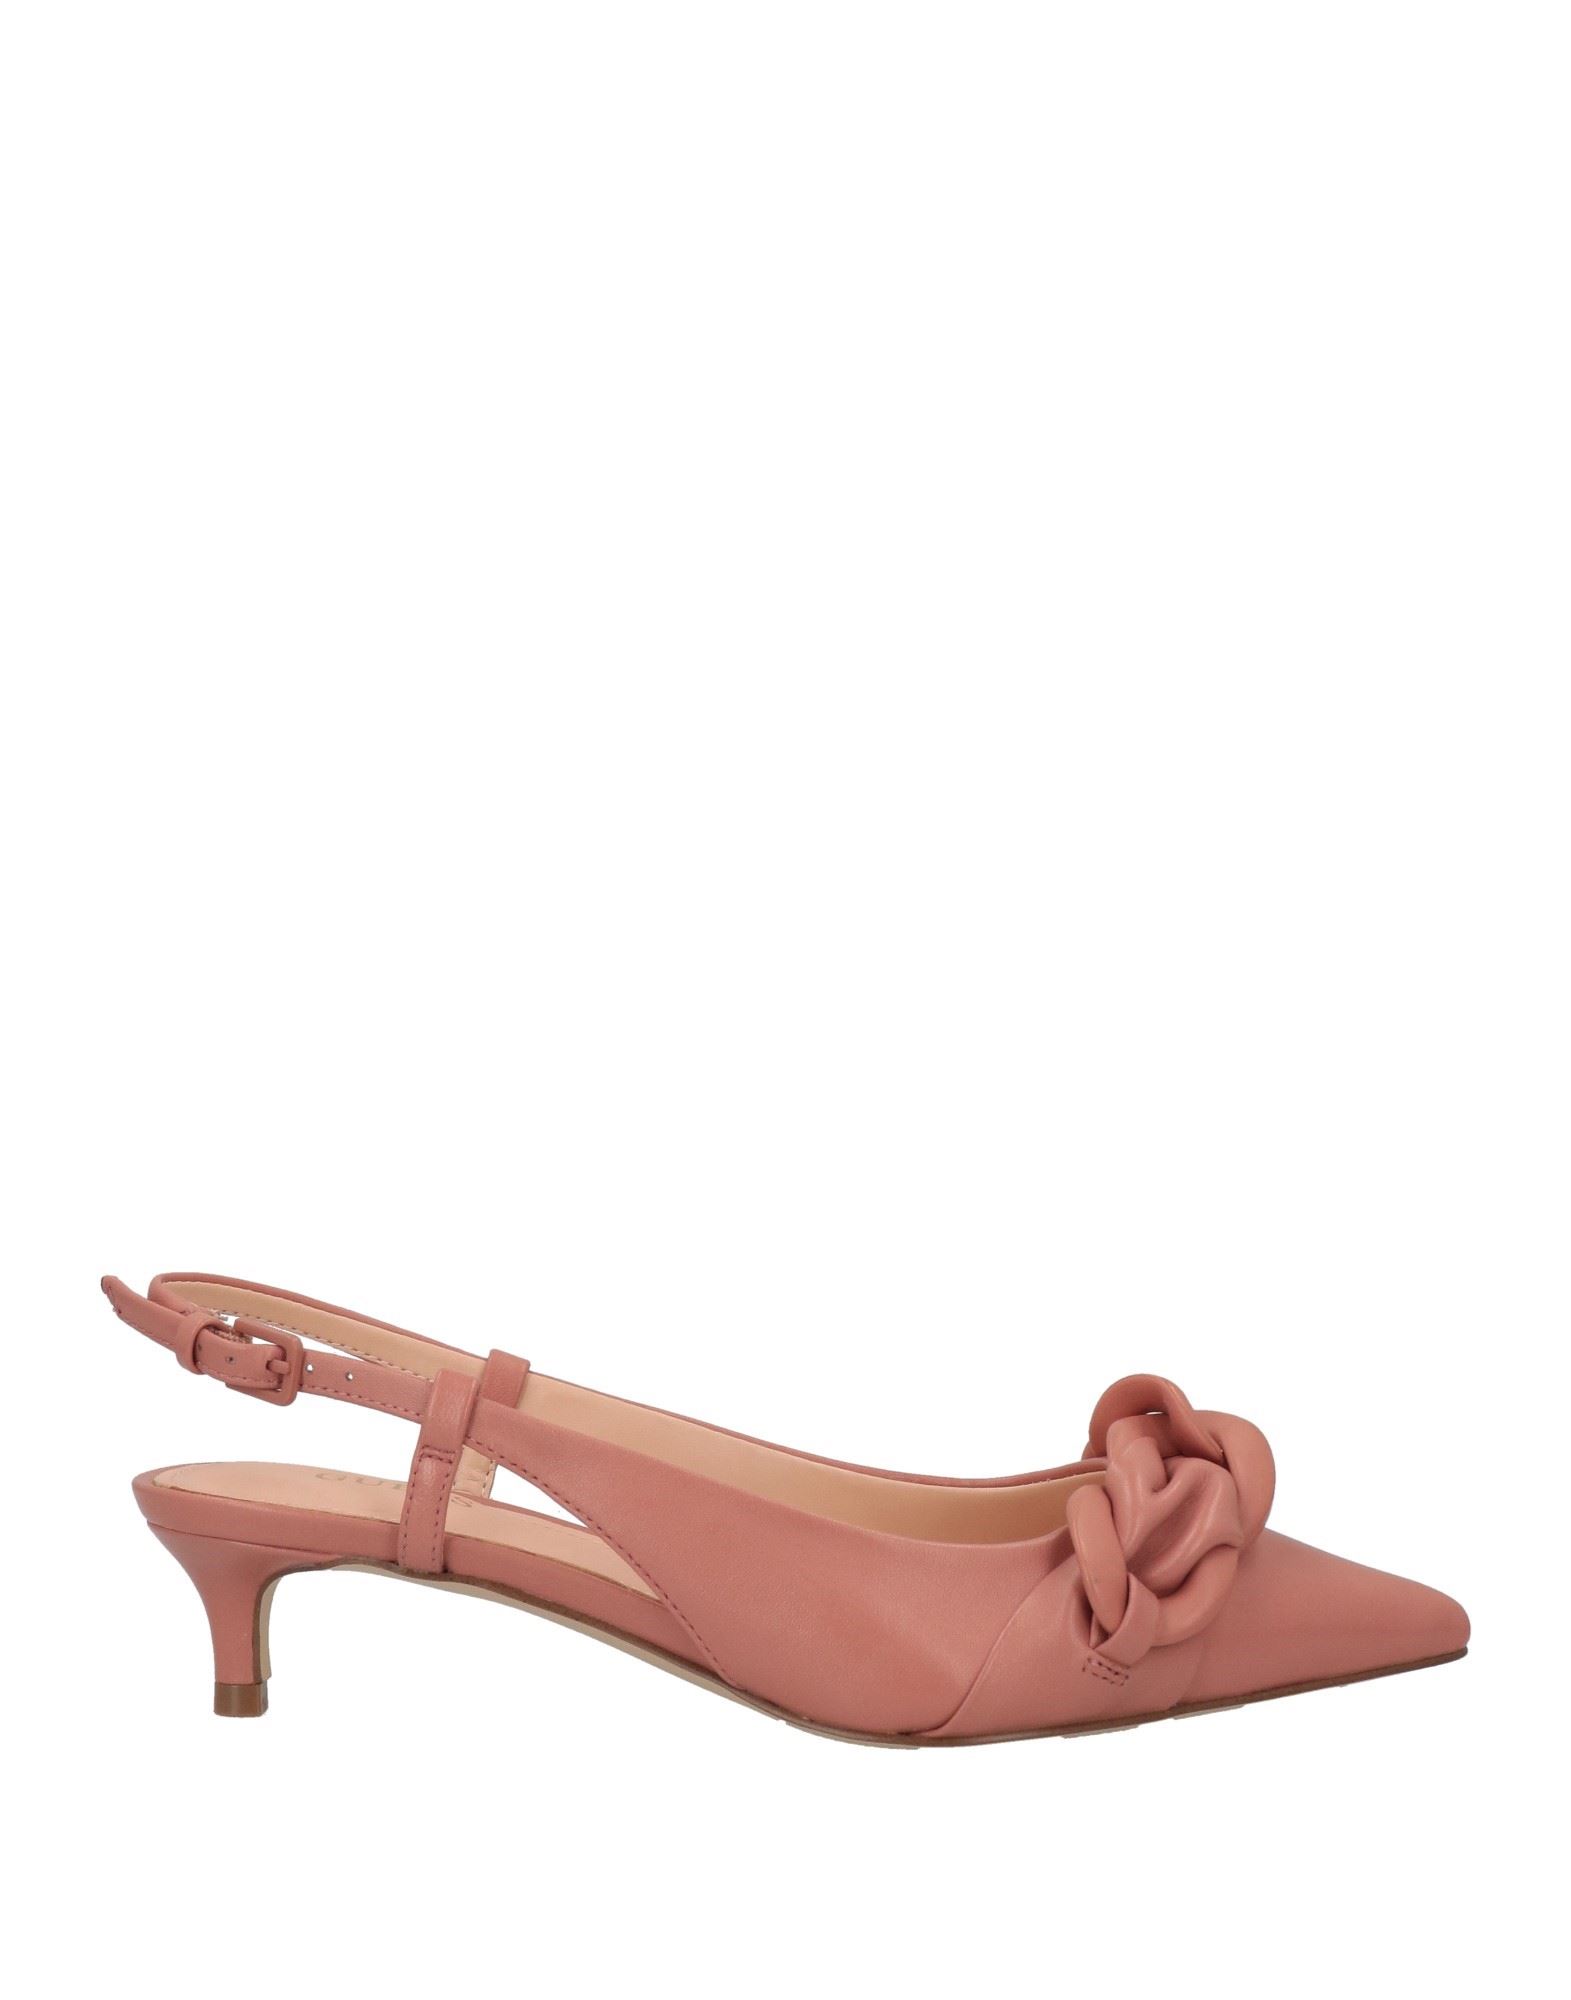 Guess Pumps In Pink